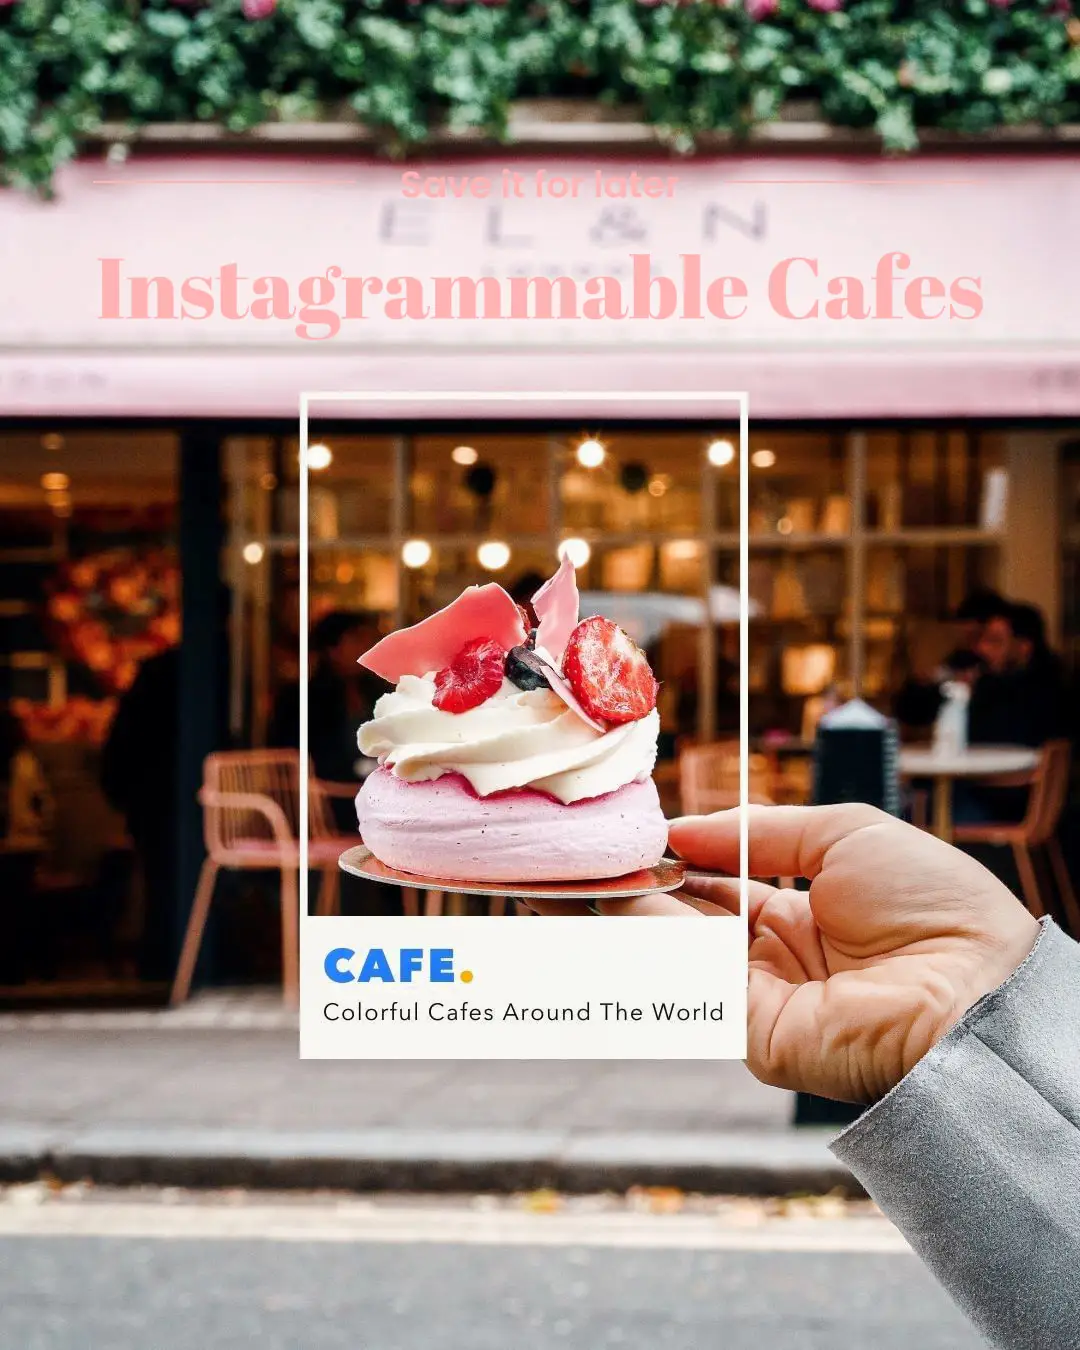 Fashion cafes around the world that are absolutely Instagram